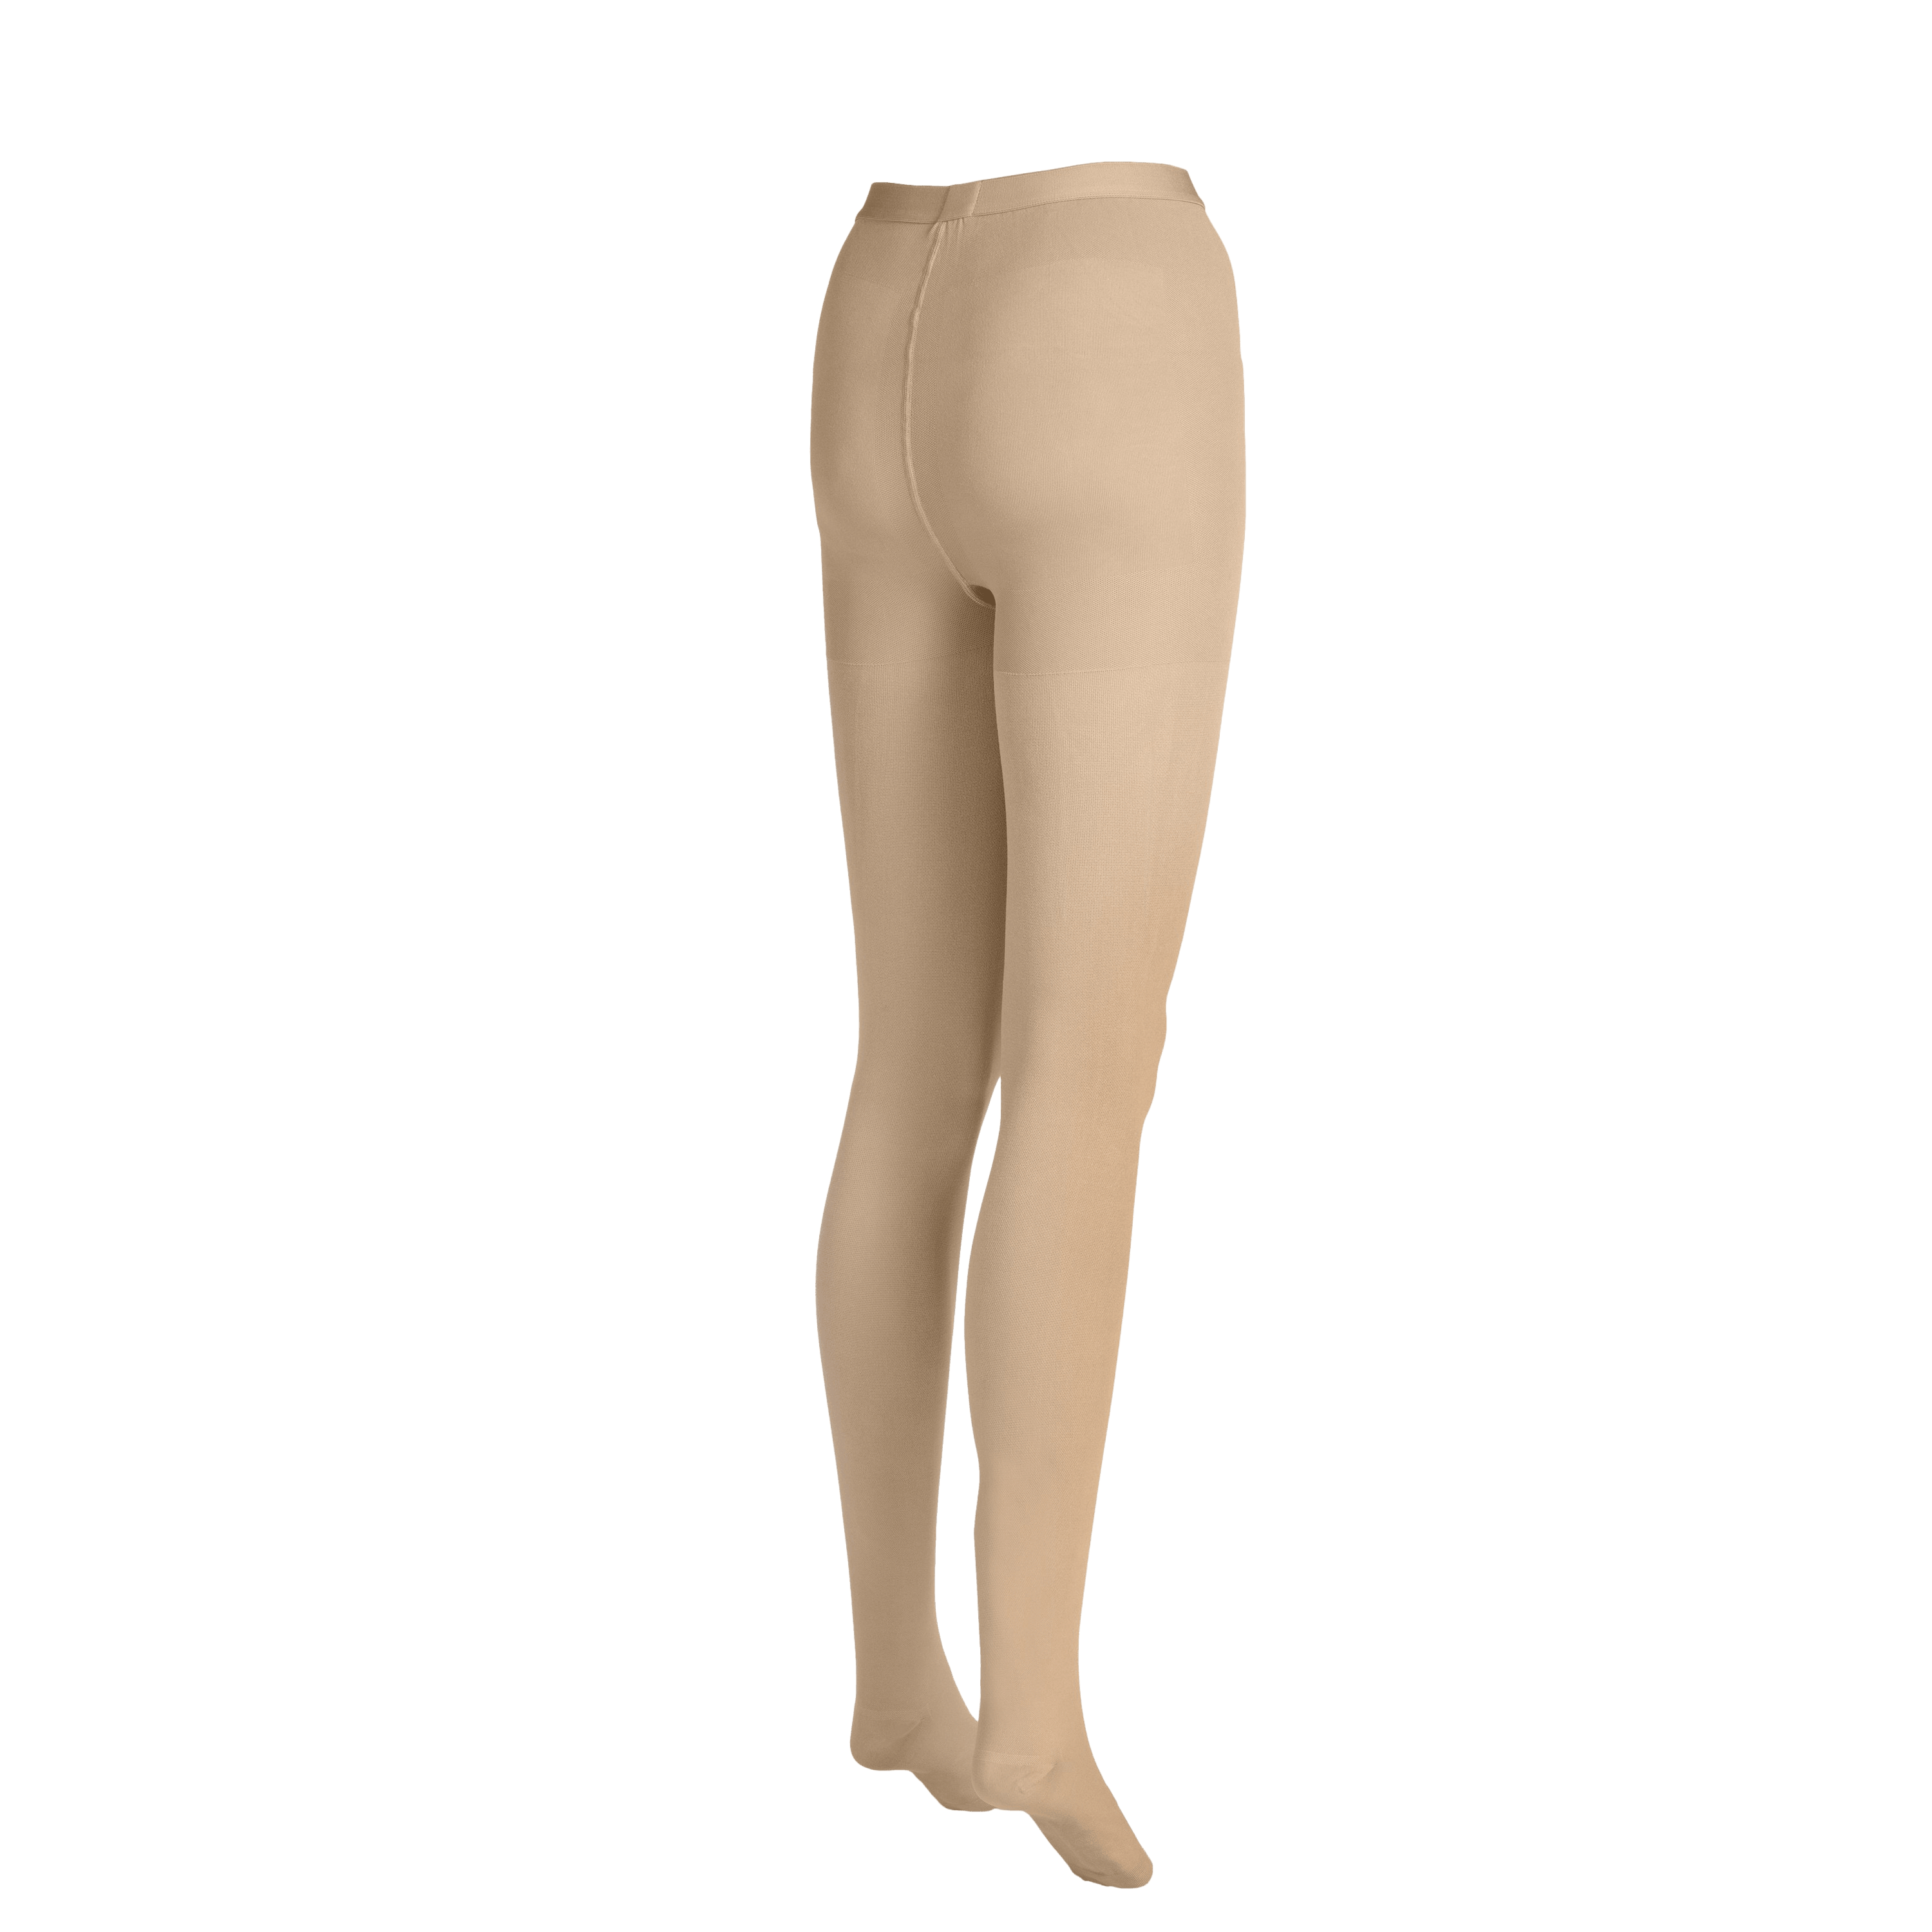 Opaque Compression Pantyhose for Women Circulation 20-30mmHg - Beige, Large  